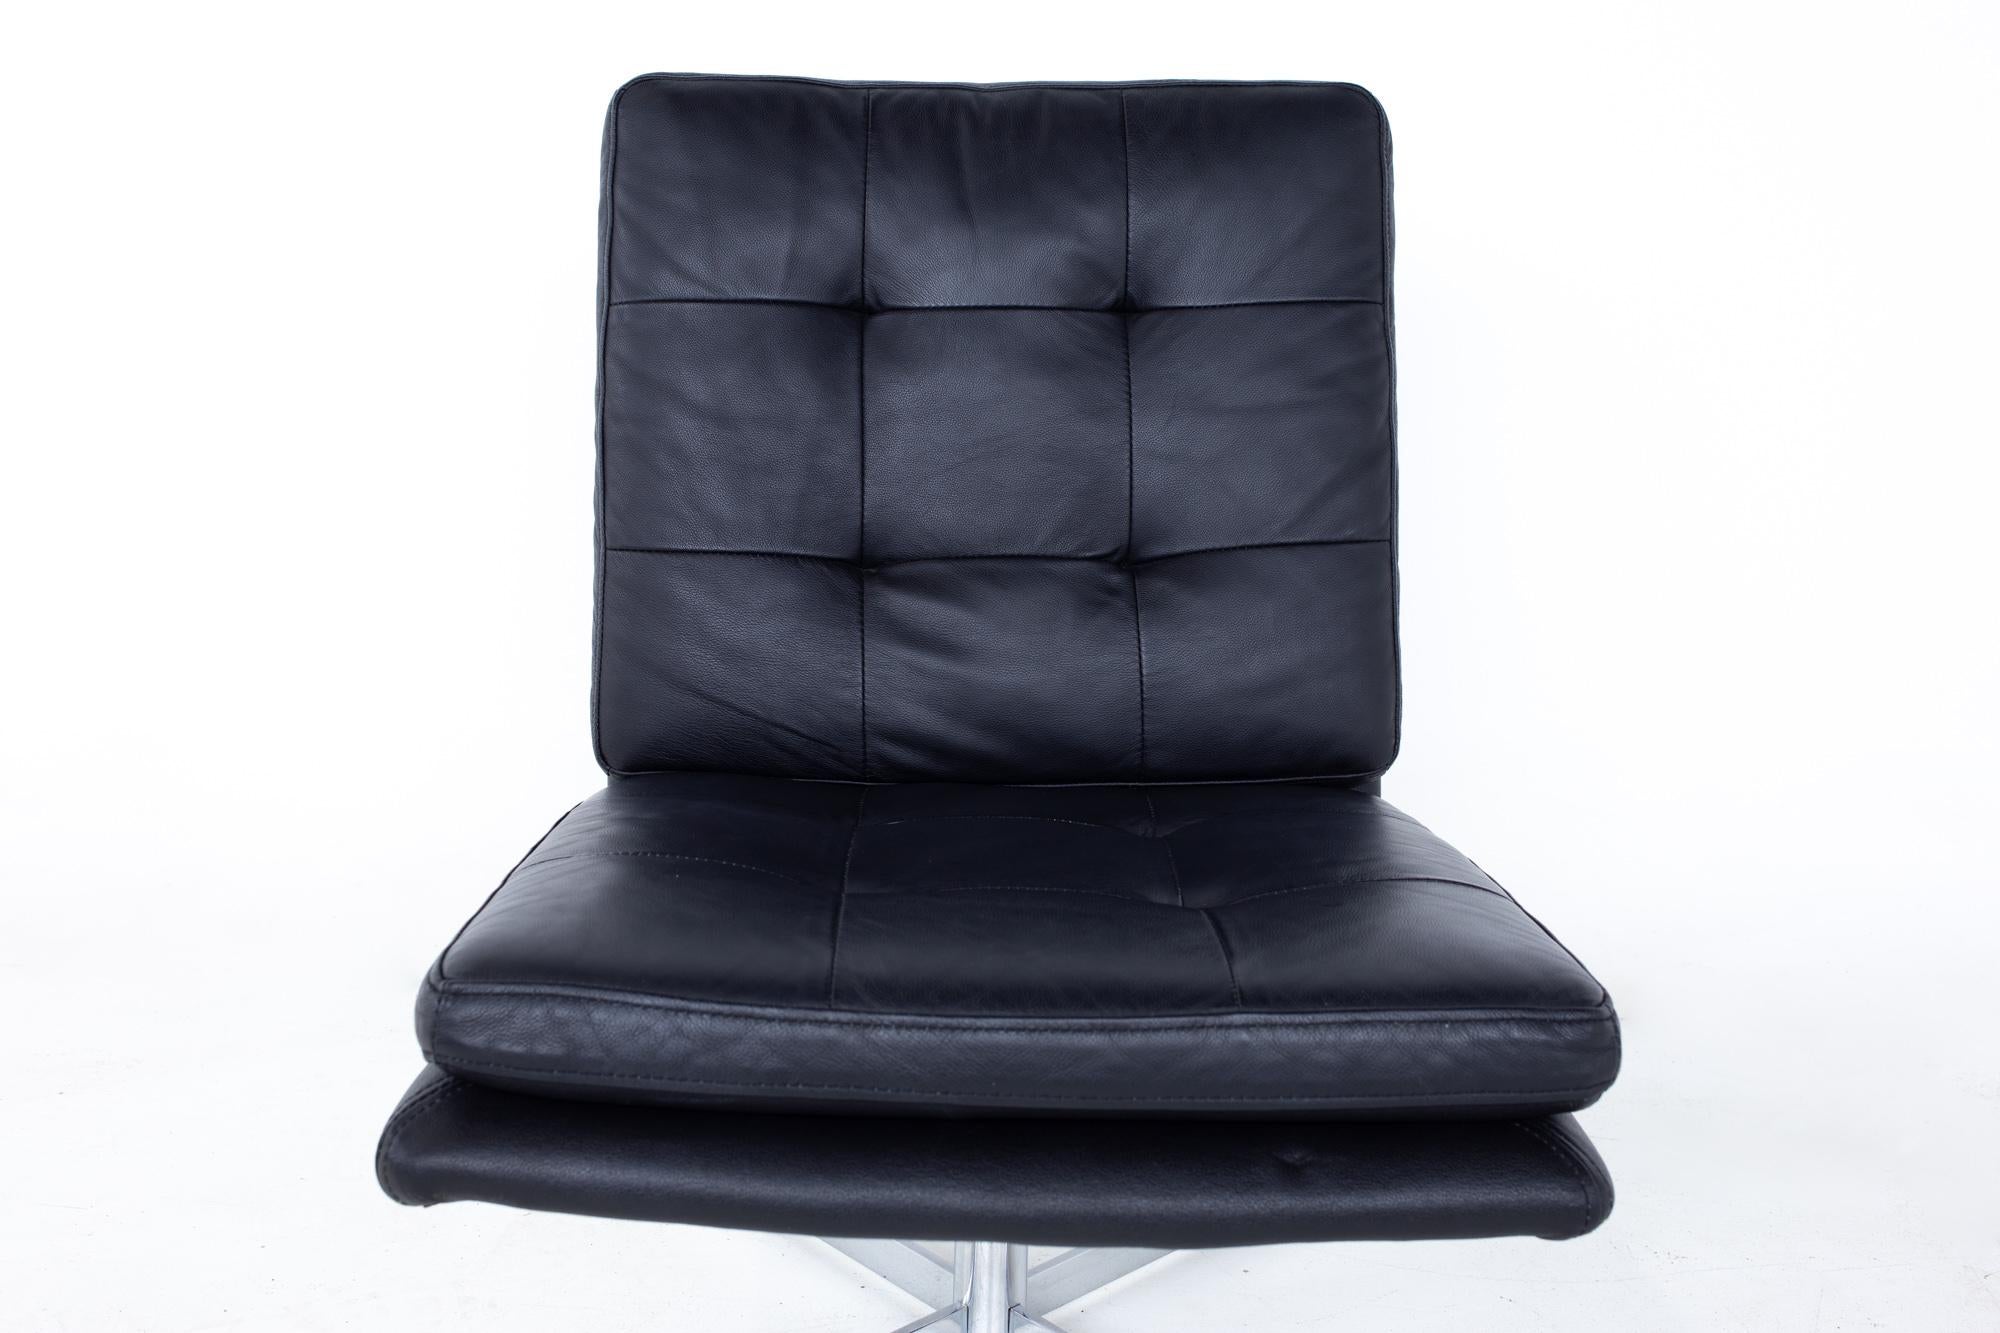 Late 20th Century Mid Century Black Leather and Chrome Slipper Lounge Chair For Sale